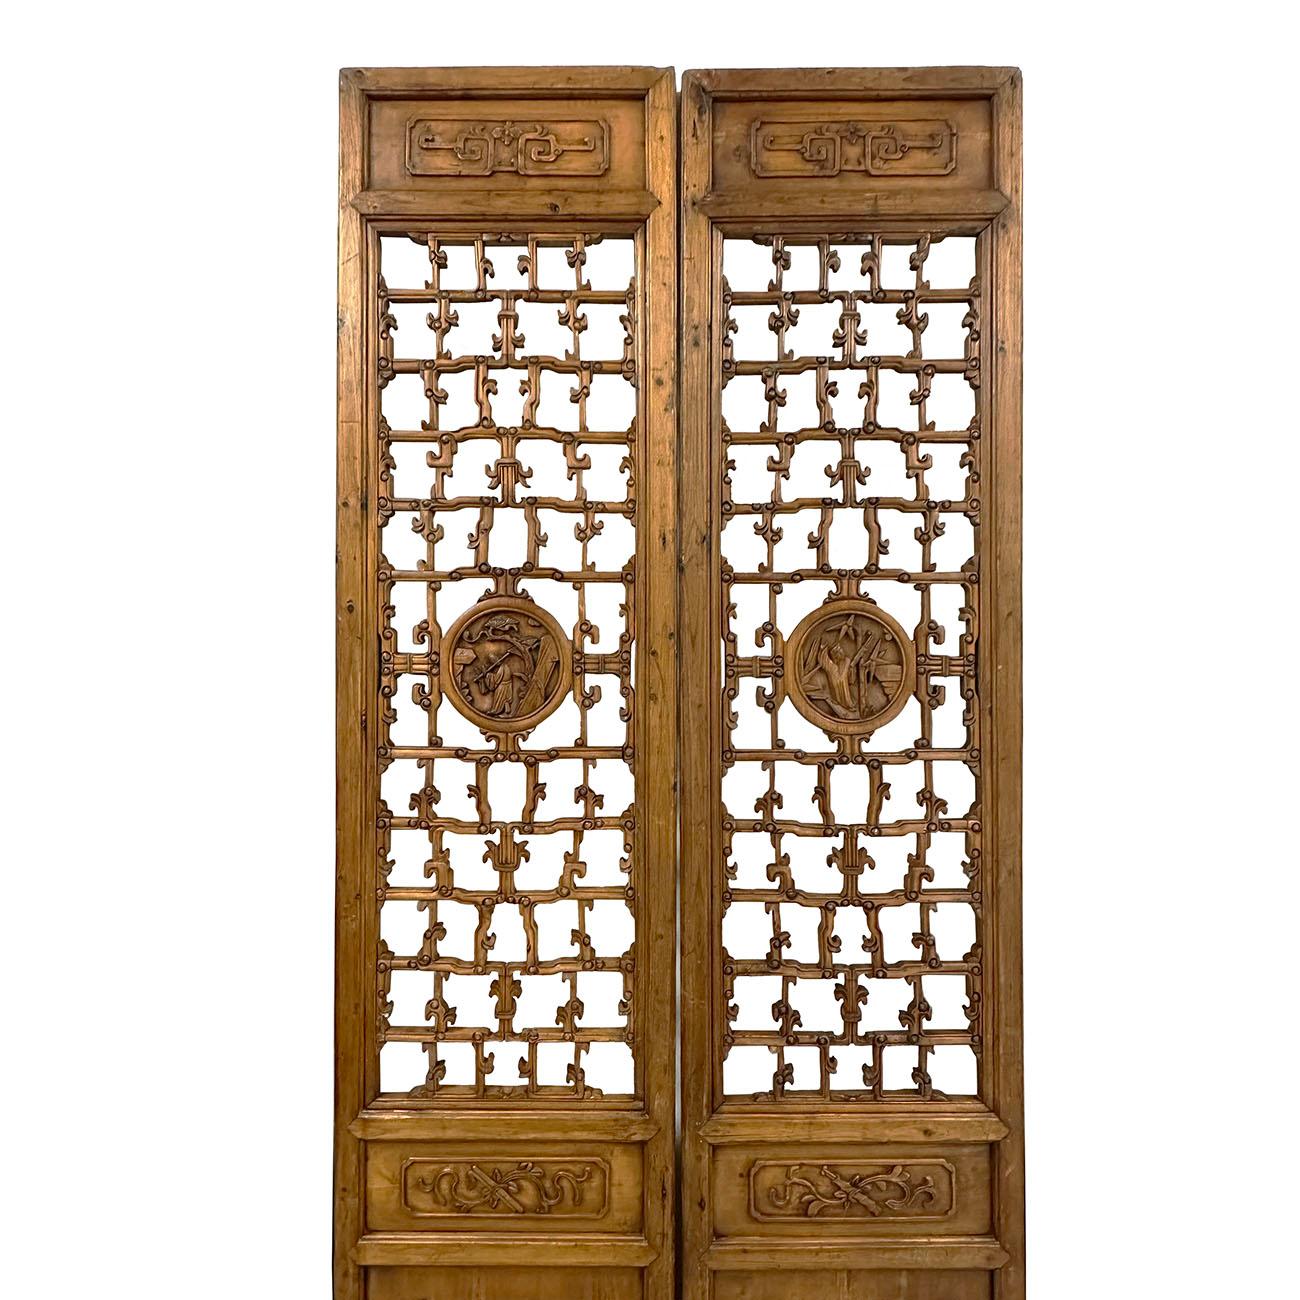 Hand-Carved Late 19th Century Antique Chinese Hand Carved 6 Panels Wooden Screen/Room Divide